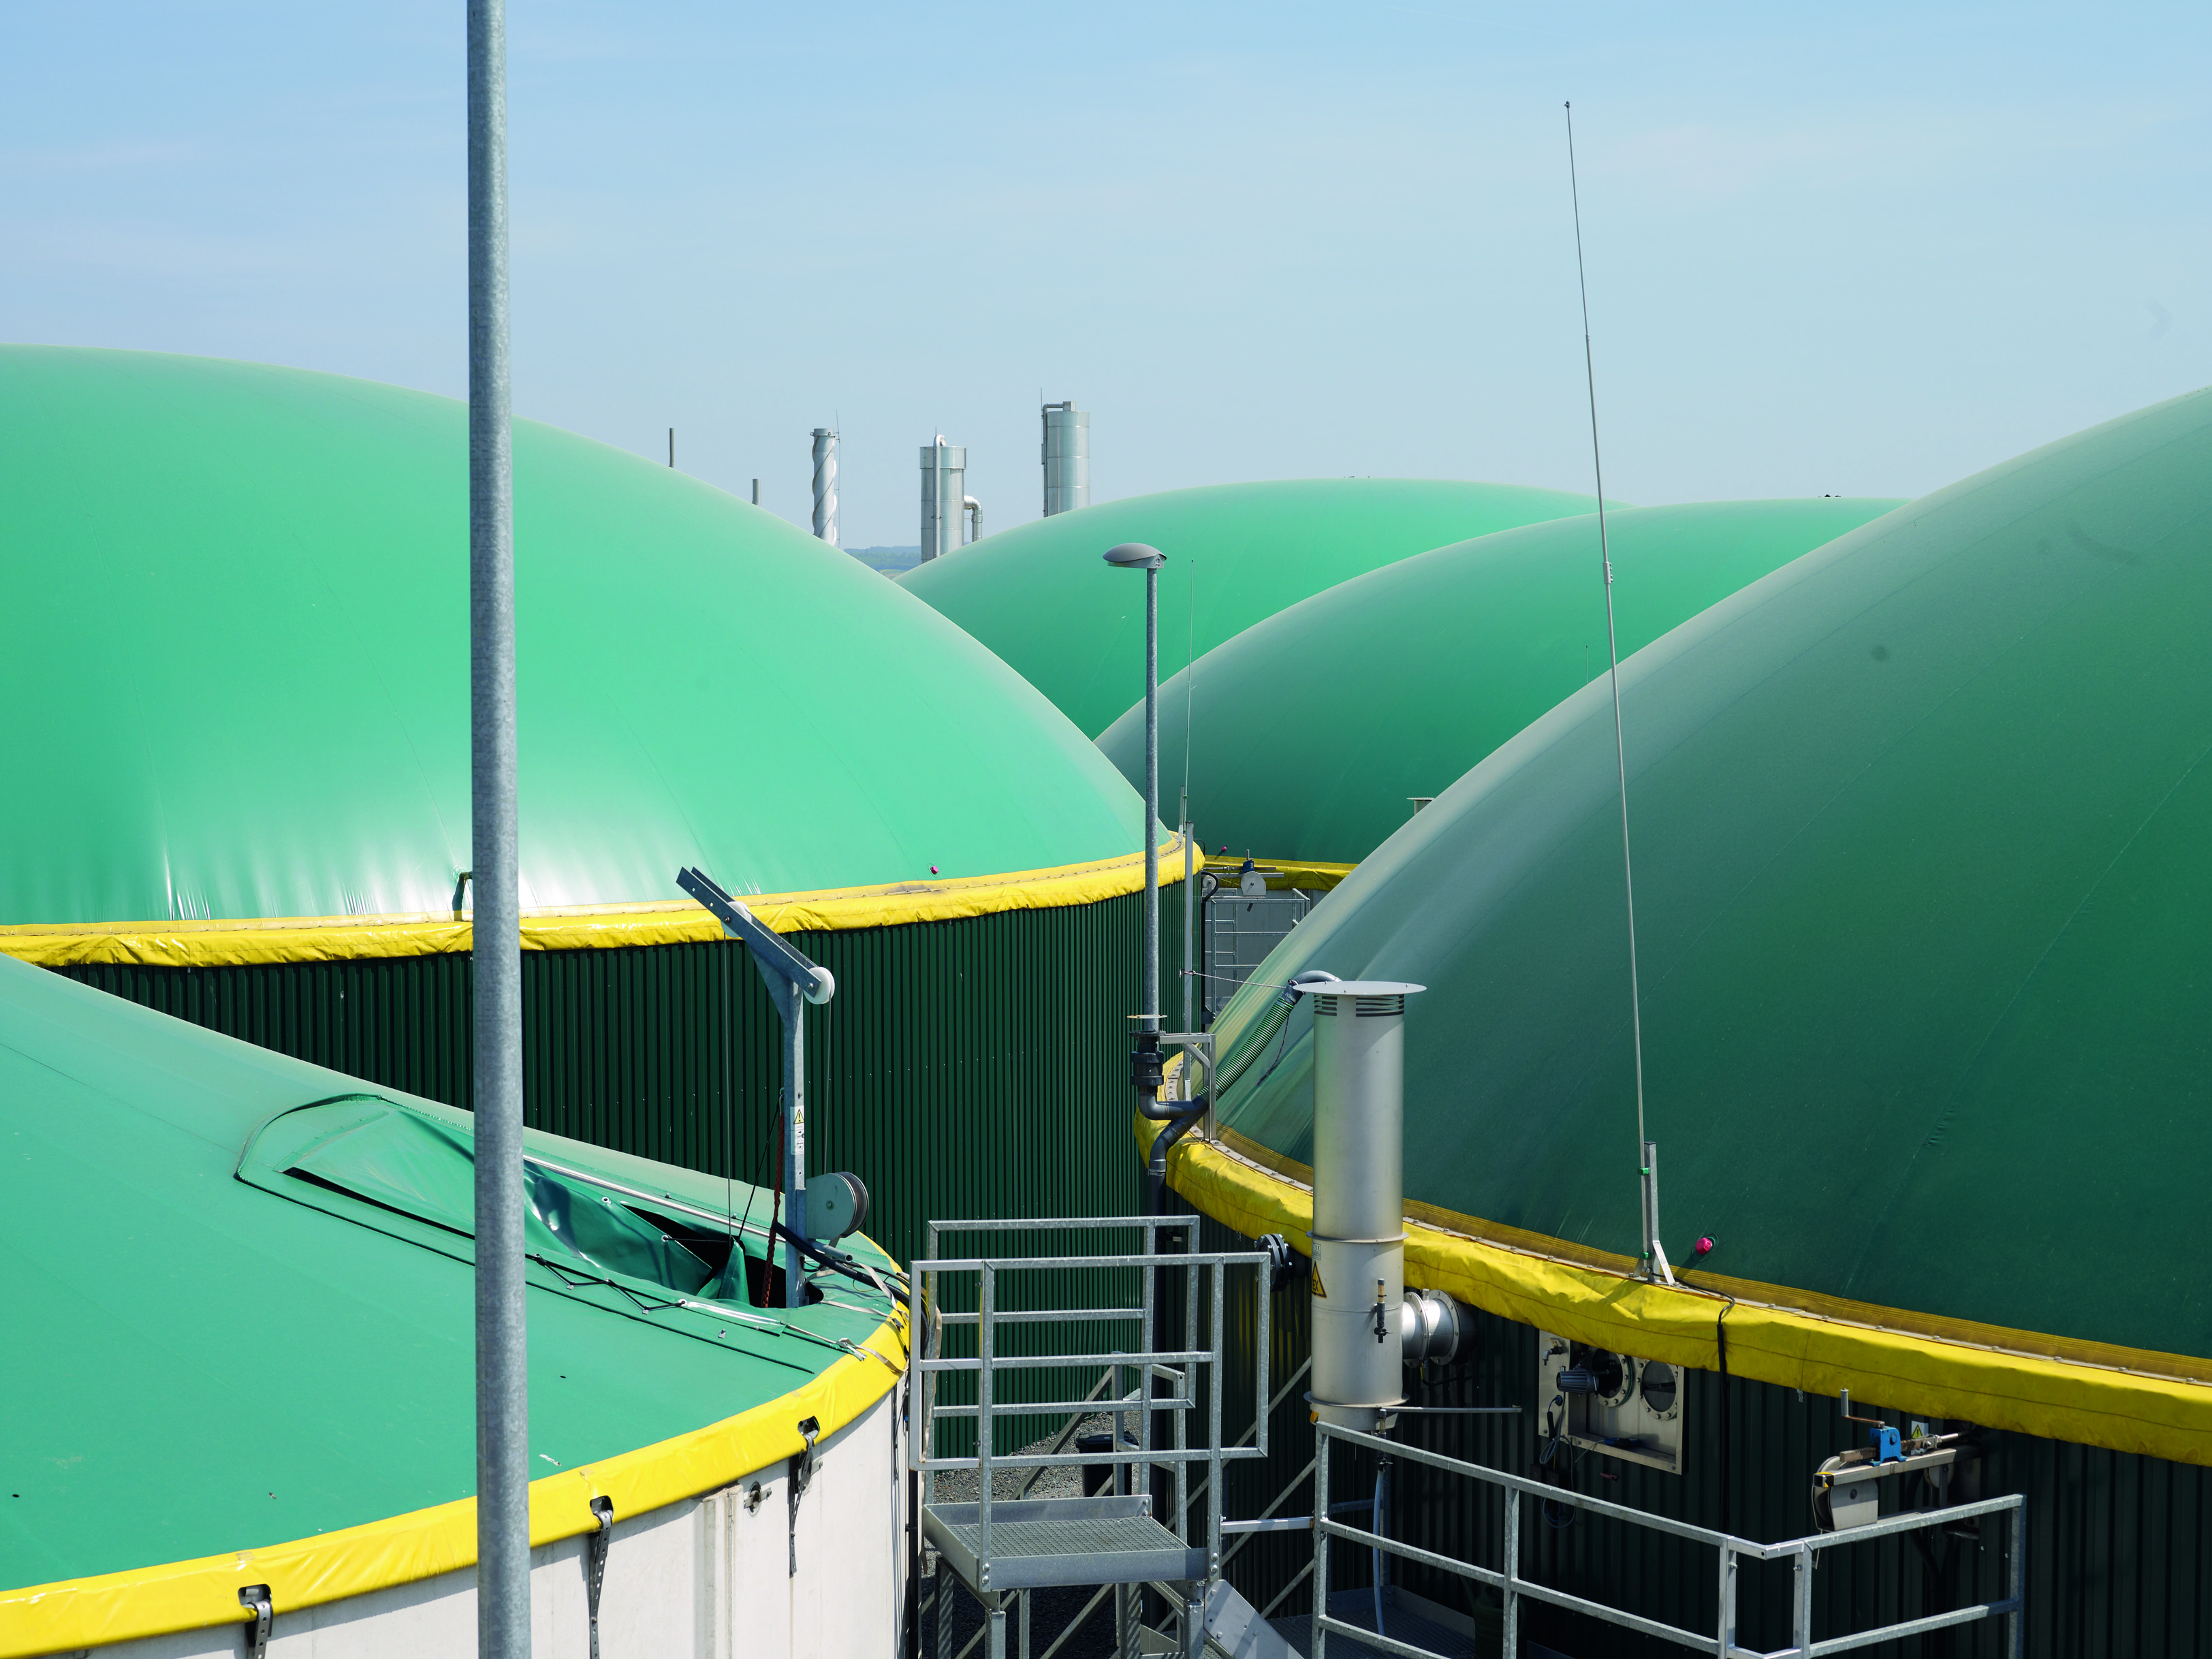 The Willingshausen biogas plant, with a plant capacity of 800 Nm³/h and an annual production of 9.1 million Nm³ of biogas and 3.5 million Nm³ of biomethane © ÖKOBIT GmbH